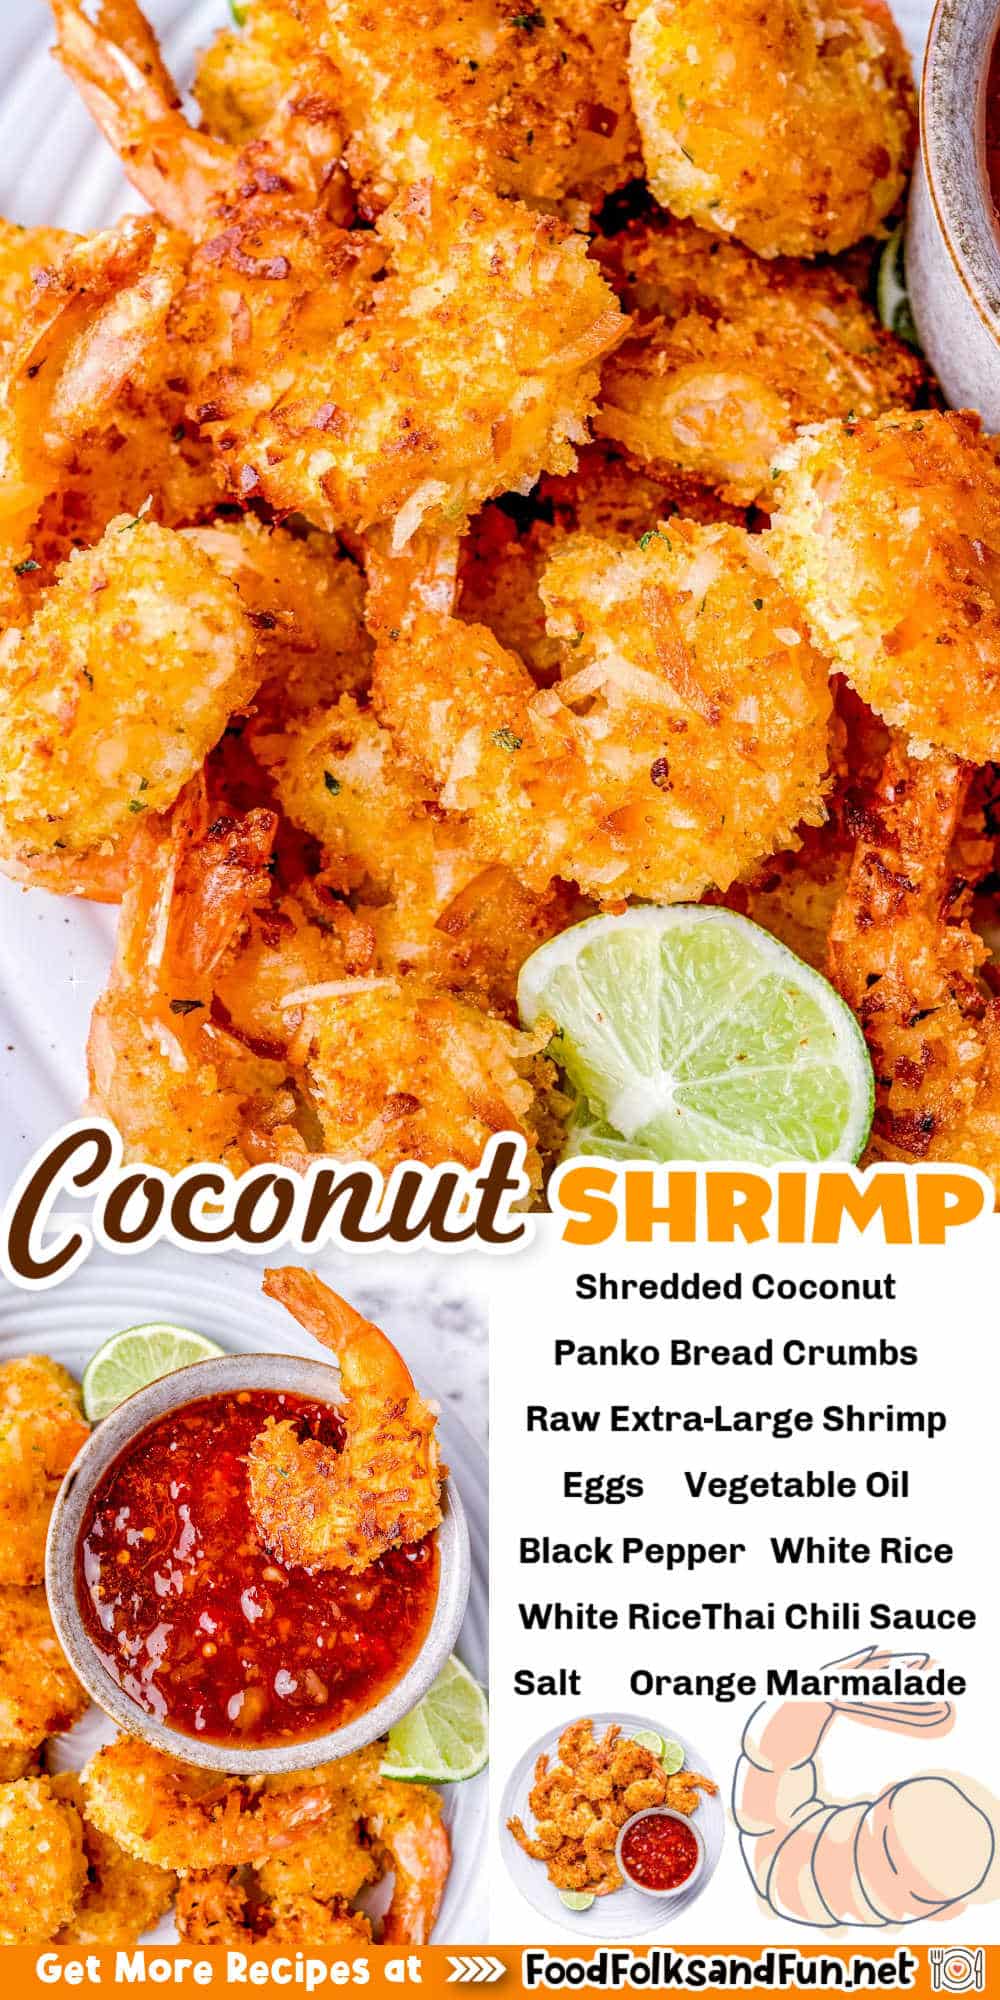 This Coconut Shrimp recipe is guaranteed to get rave reviews and recipe requests! They're crispy, sweet, and cooked to golden perfection. via @foodfolksandfun